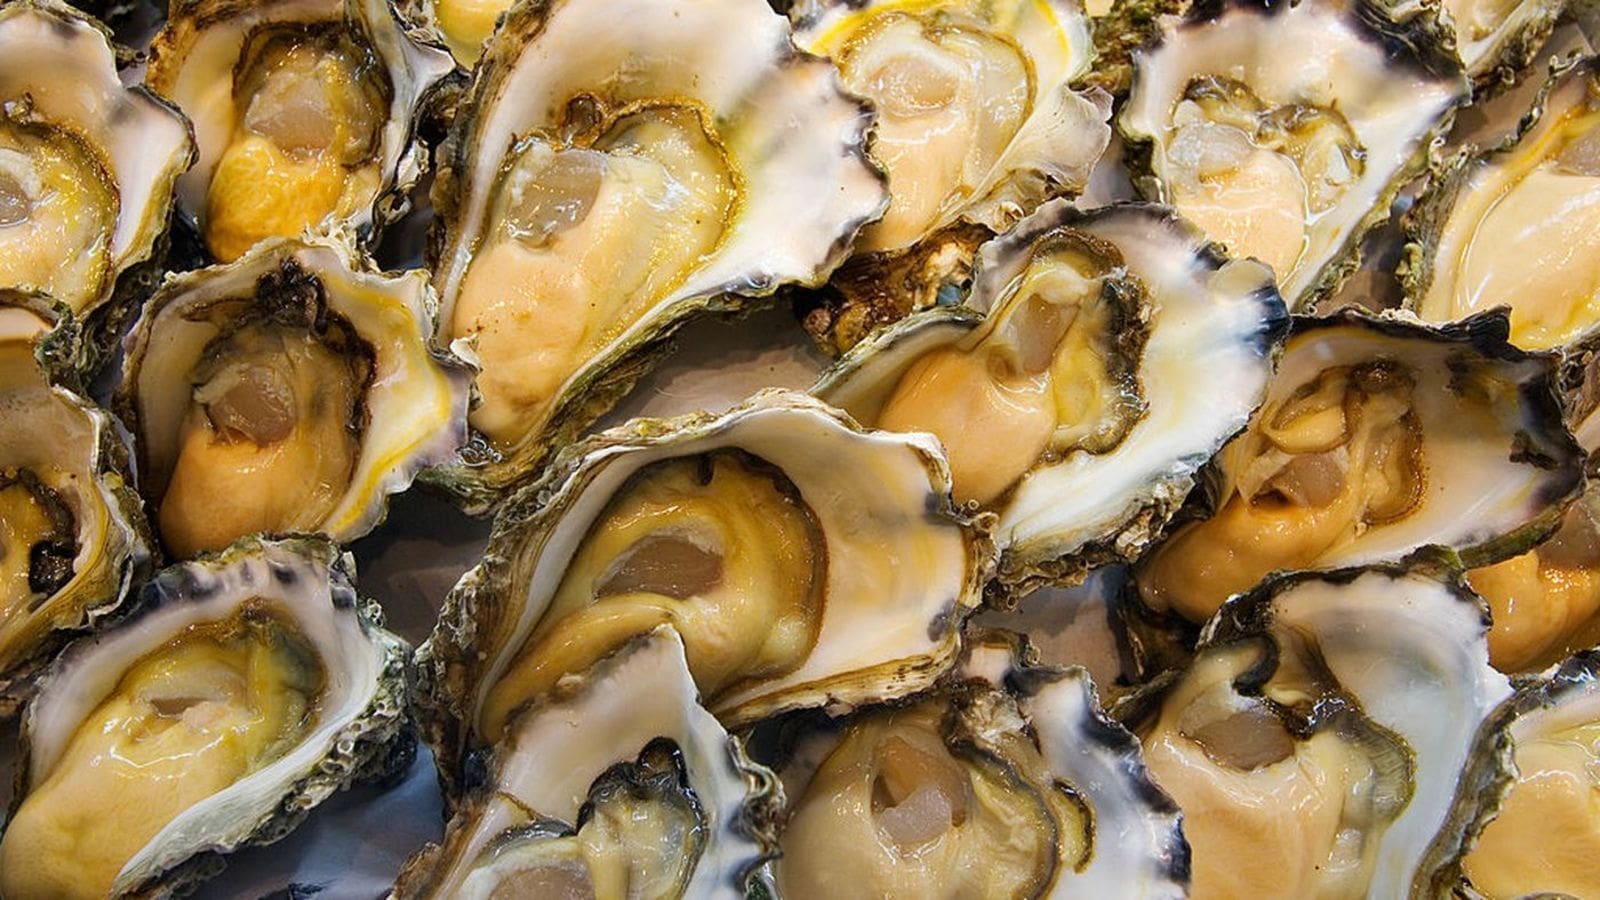 Scotland researchers receive over US$ 200,000 to device oyster diseases detection tests